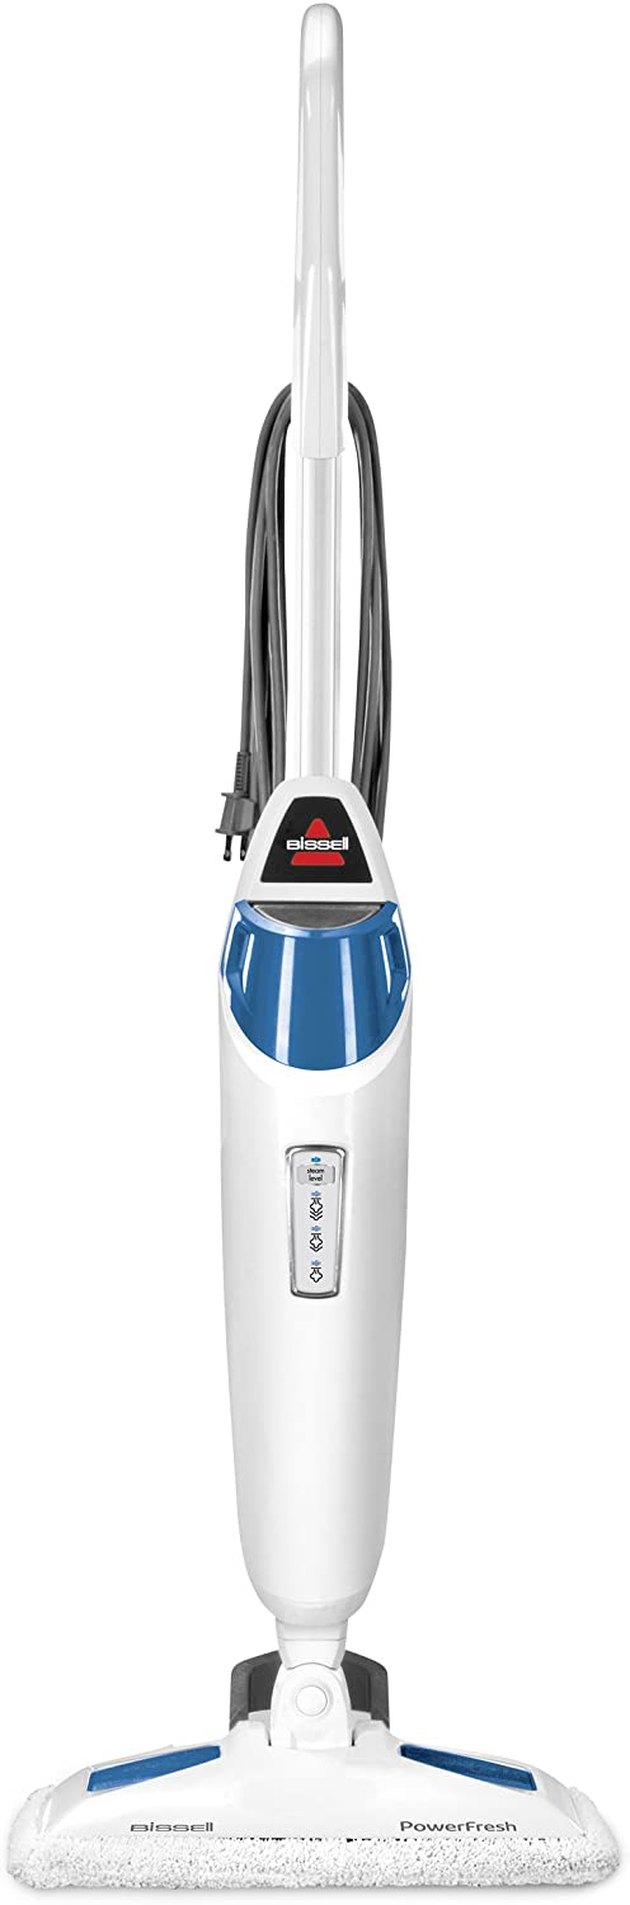 Clean hardwood floors and tiles with this Bissell steam mop. It gets rid of 99.9% of germs and bacteria and has a convenient scrubber for extra tough messes. With multiple steam settings, you can clean surfaces without chemicals. It also has a removable water tank for easy refills.